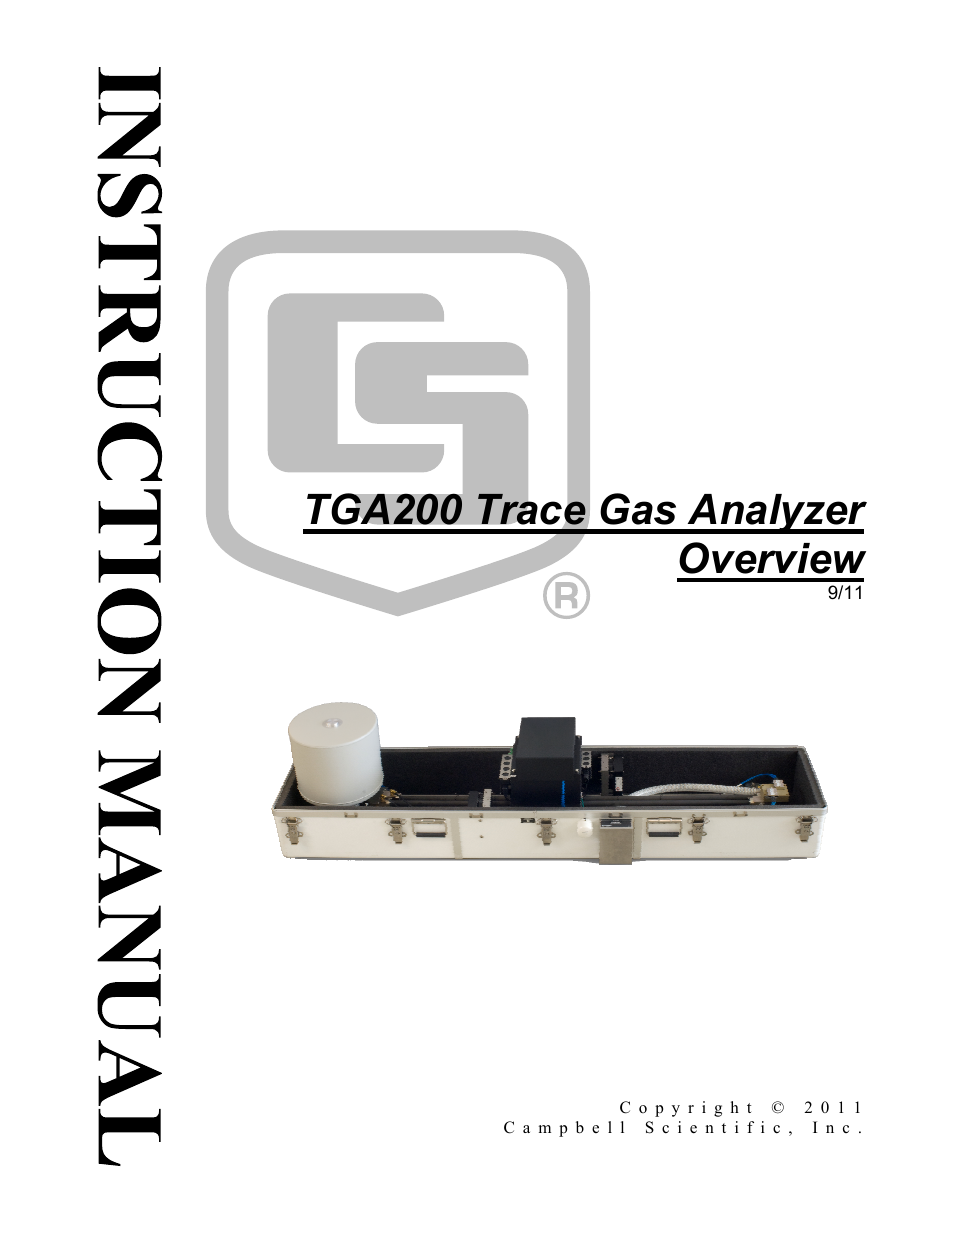 TGA200 Trace Gas Analyzer Overview